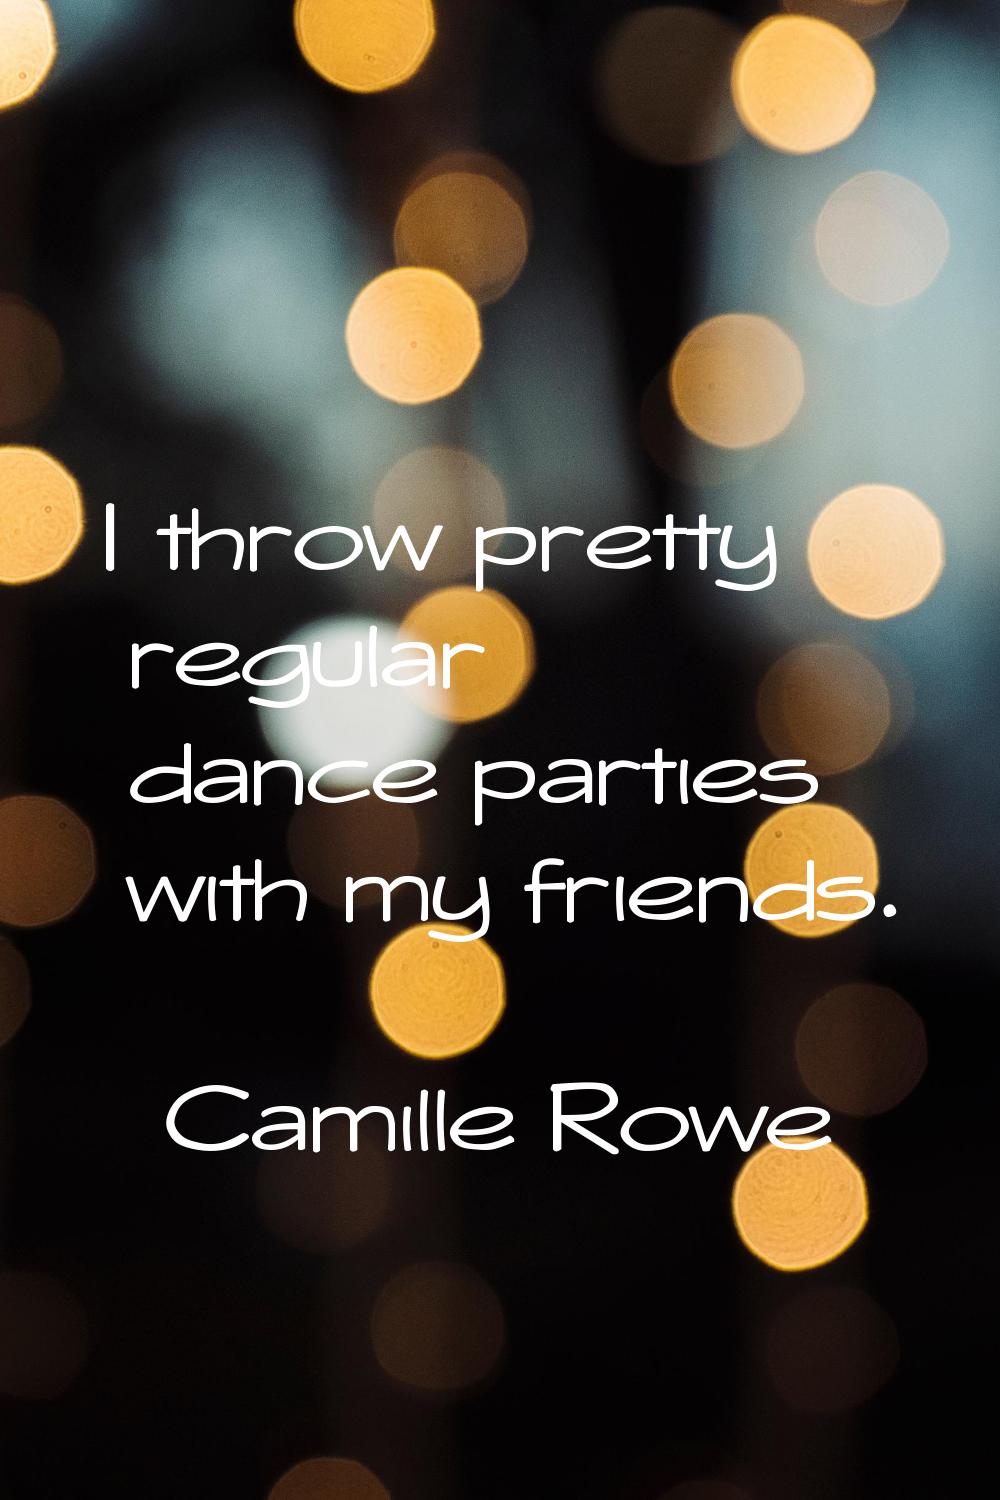 I throw pretty regular dance parties with my friends.